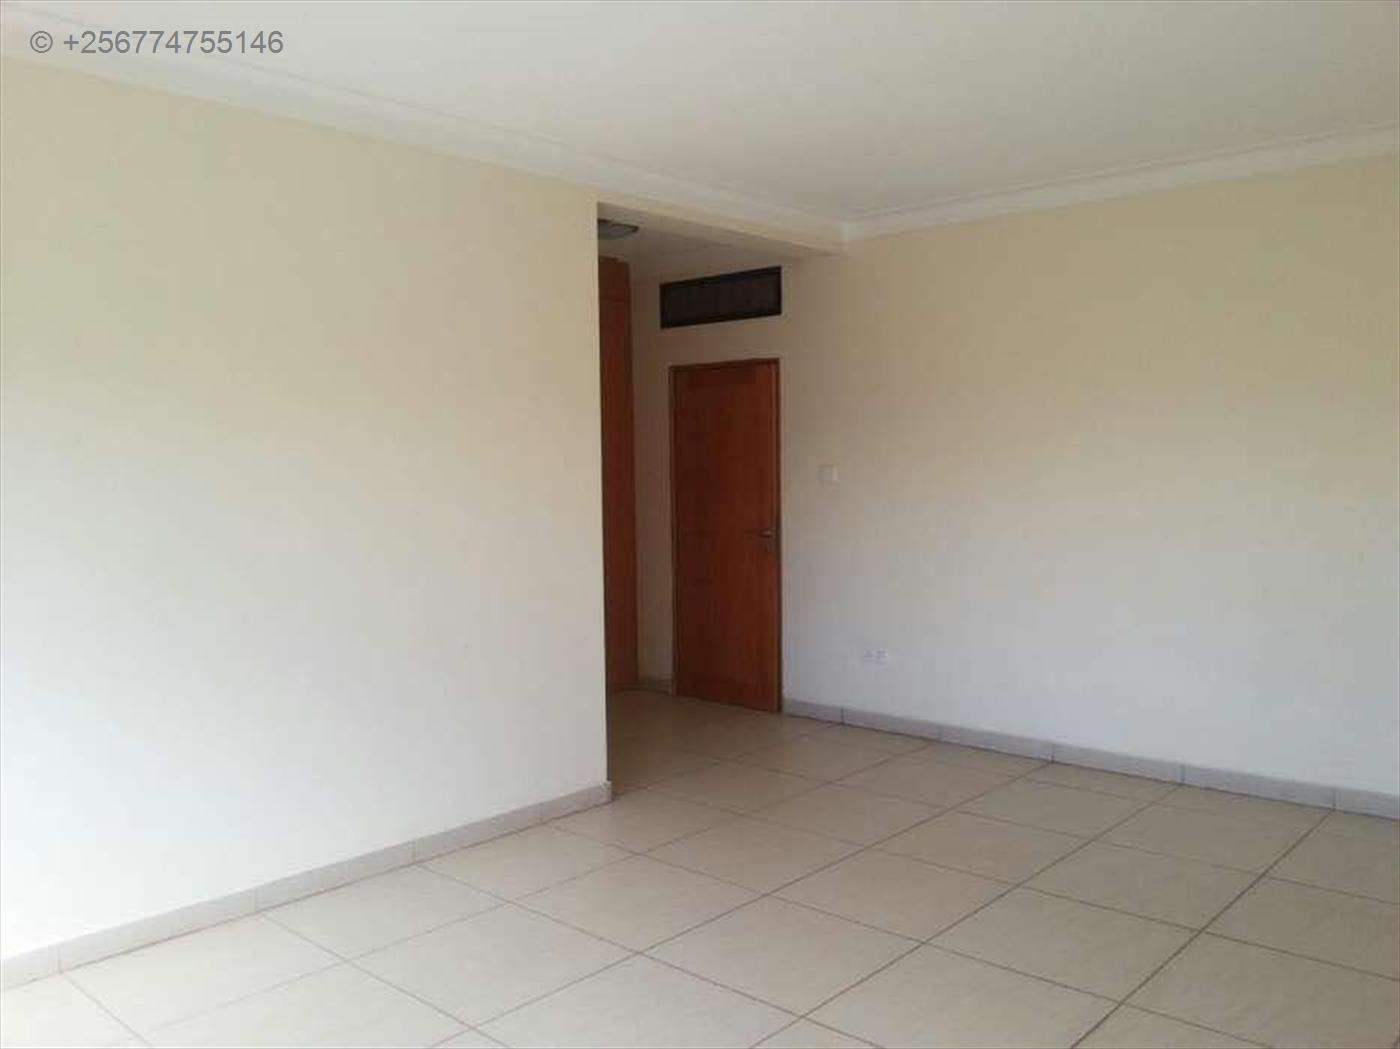 Town House for rent in Kyambogo Kampala